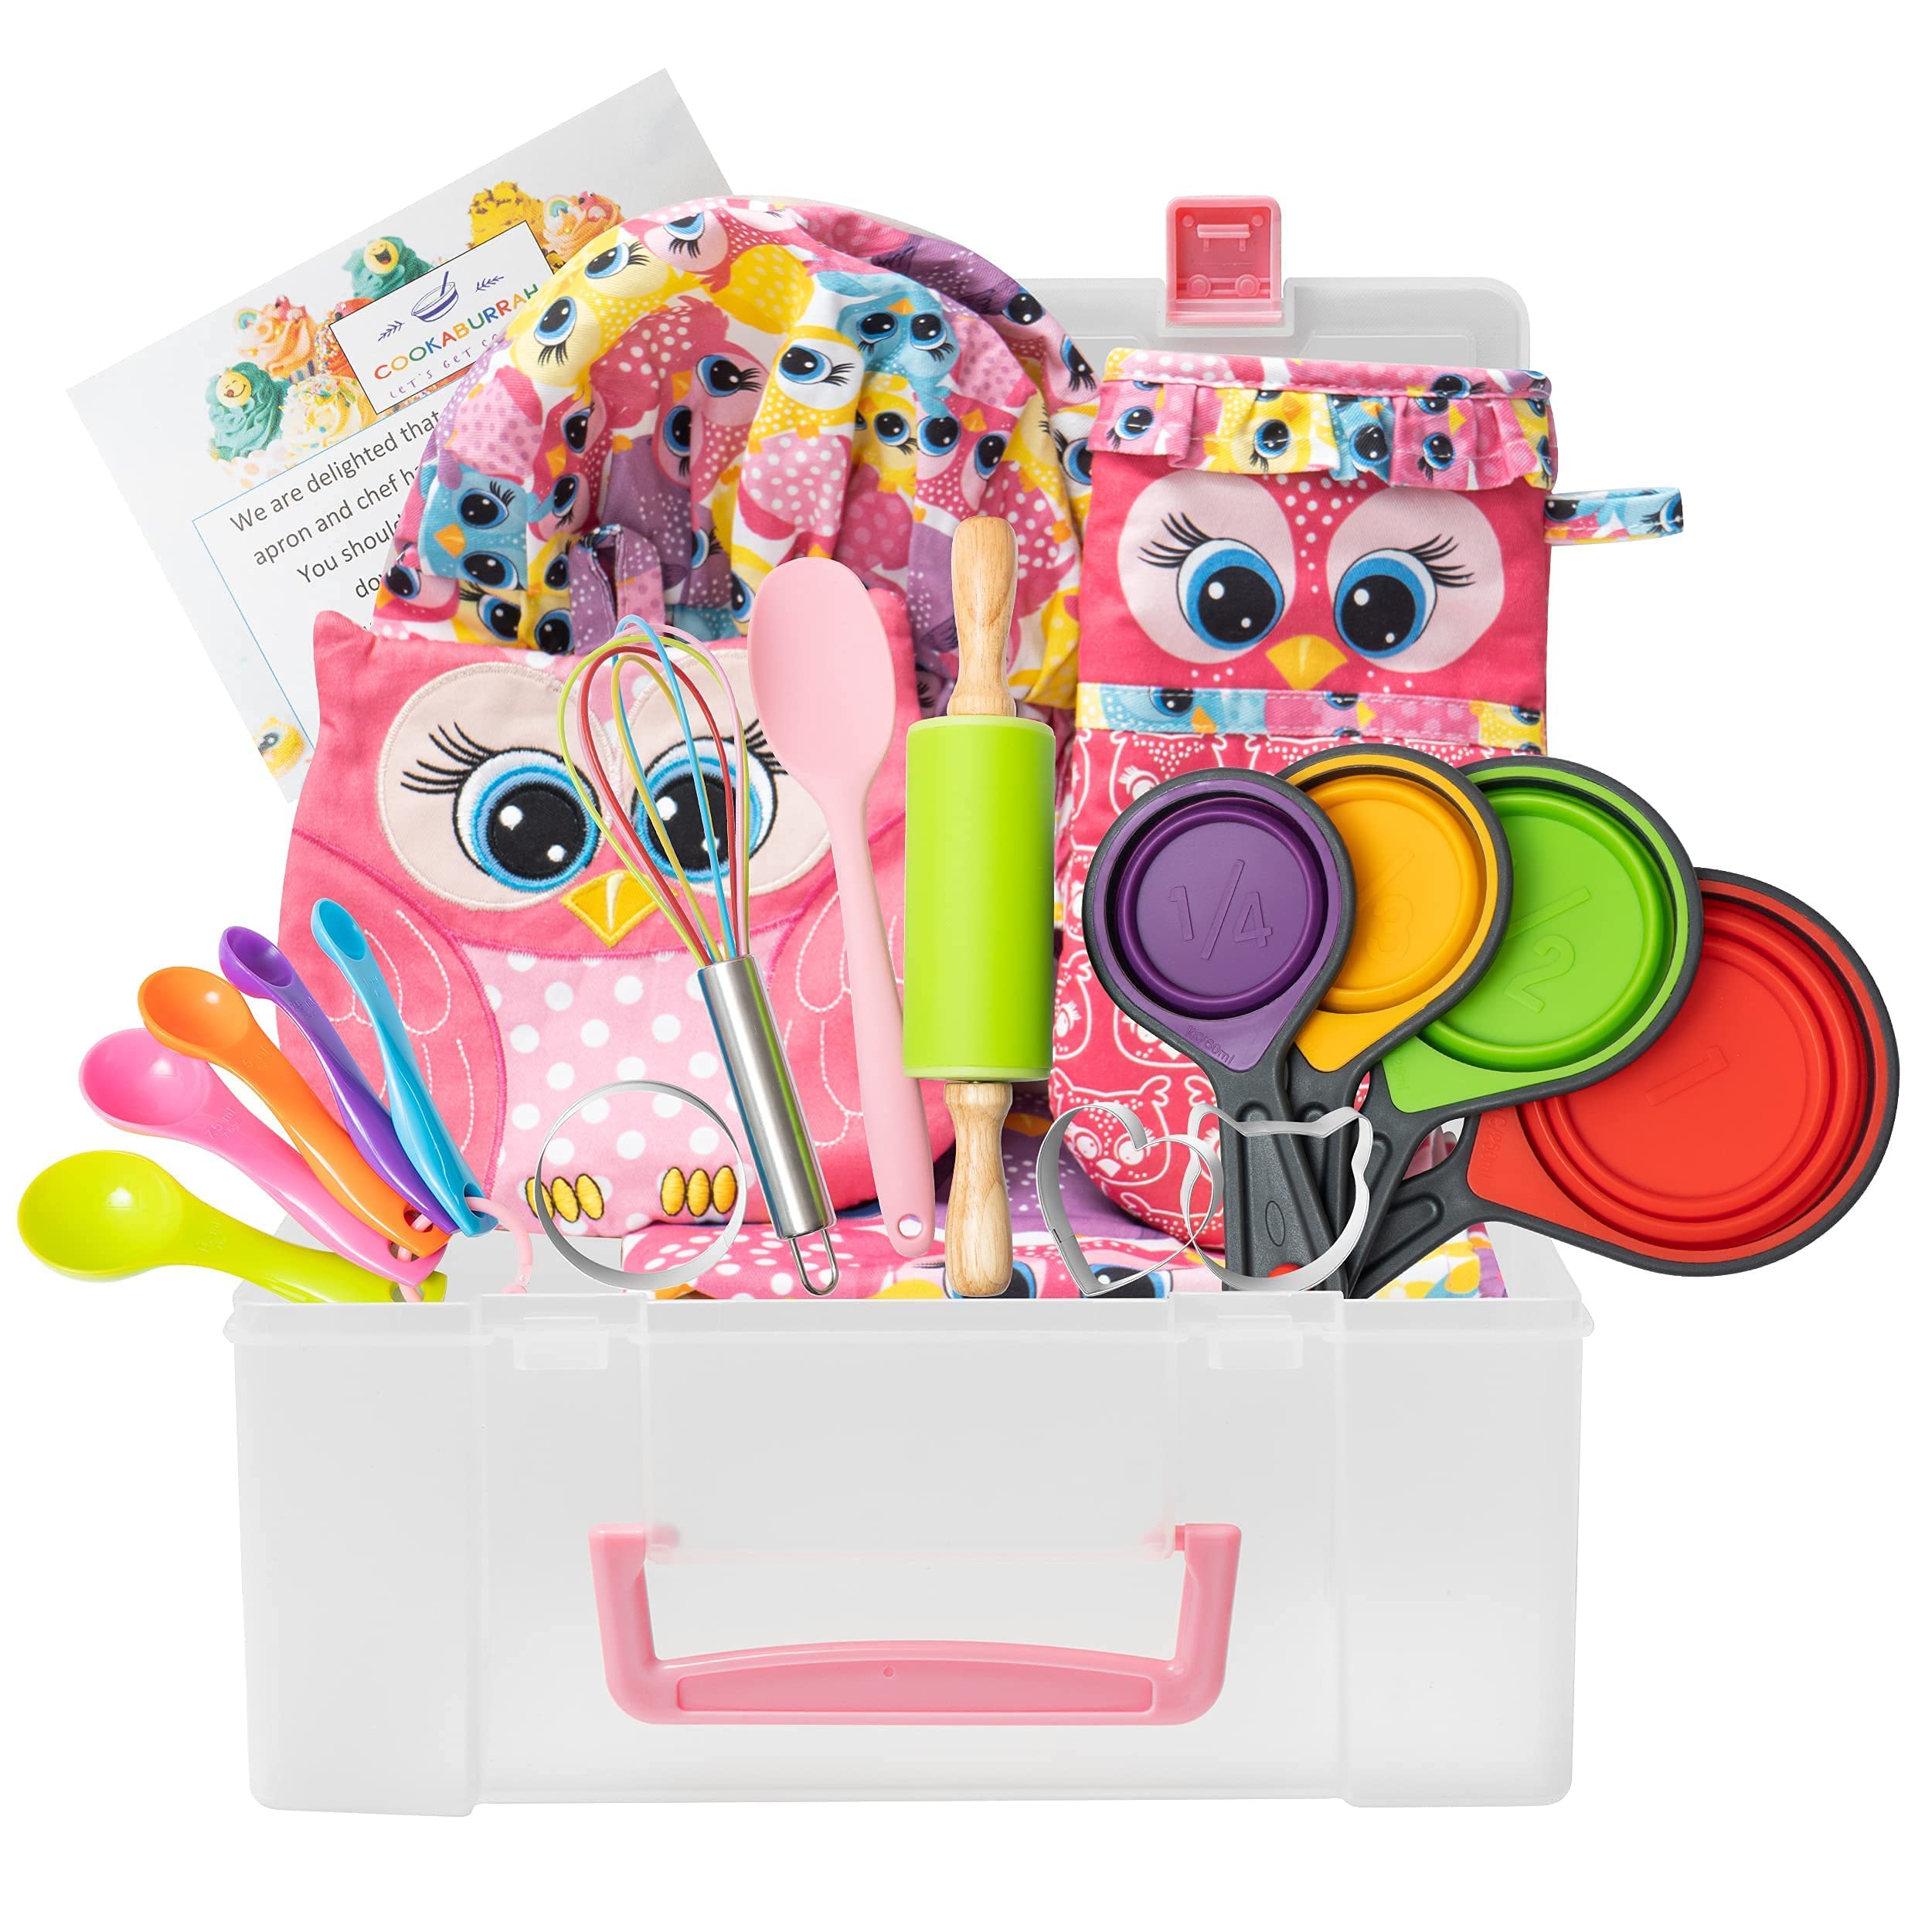 Cookaburrah Kids Cooking Sets- Baking Gifts Set with Storage Case 21 PCS Cooking Supplies for Junior Real Kitchen Accessori